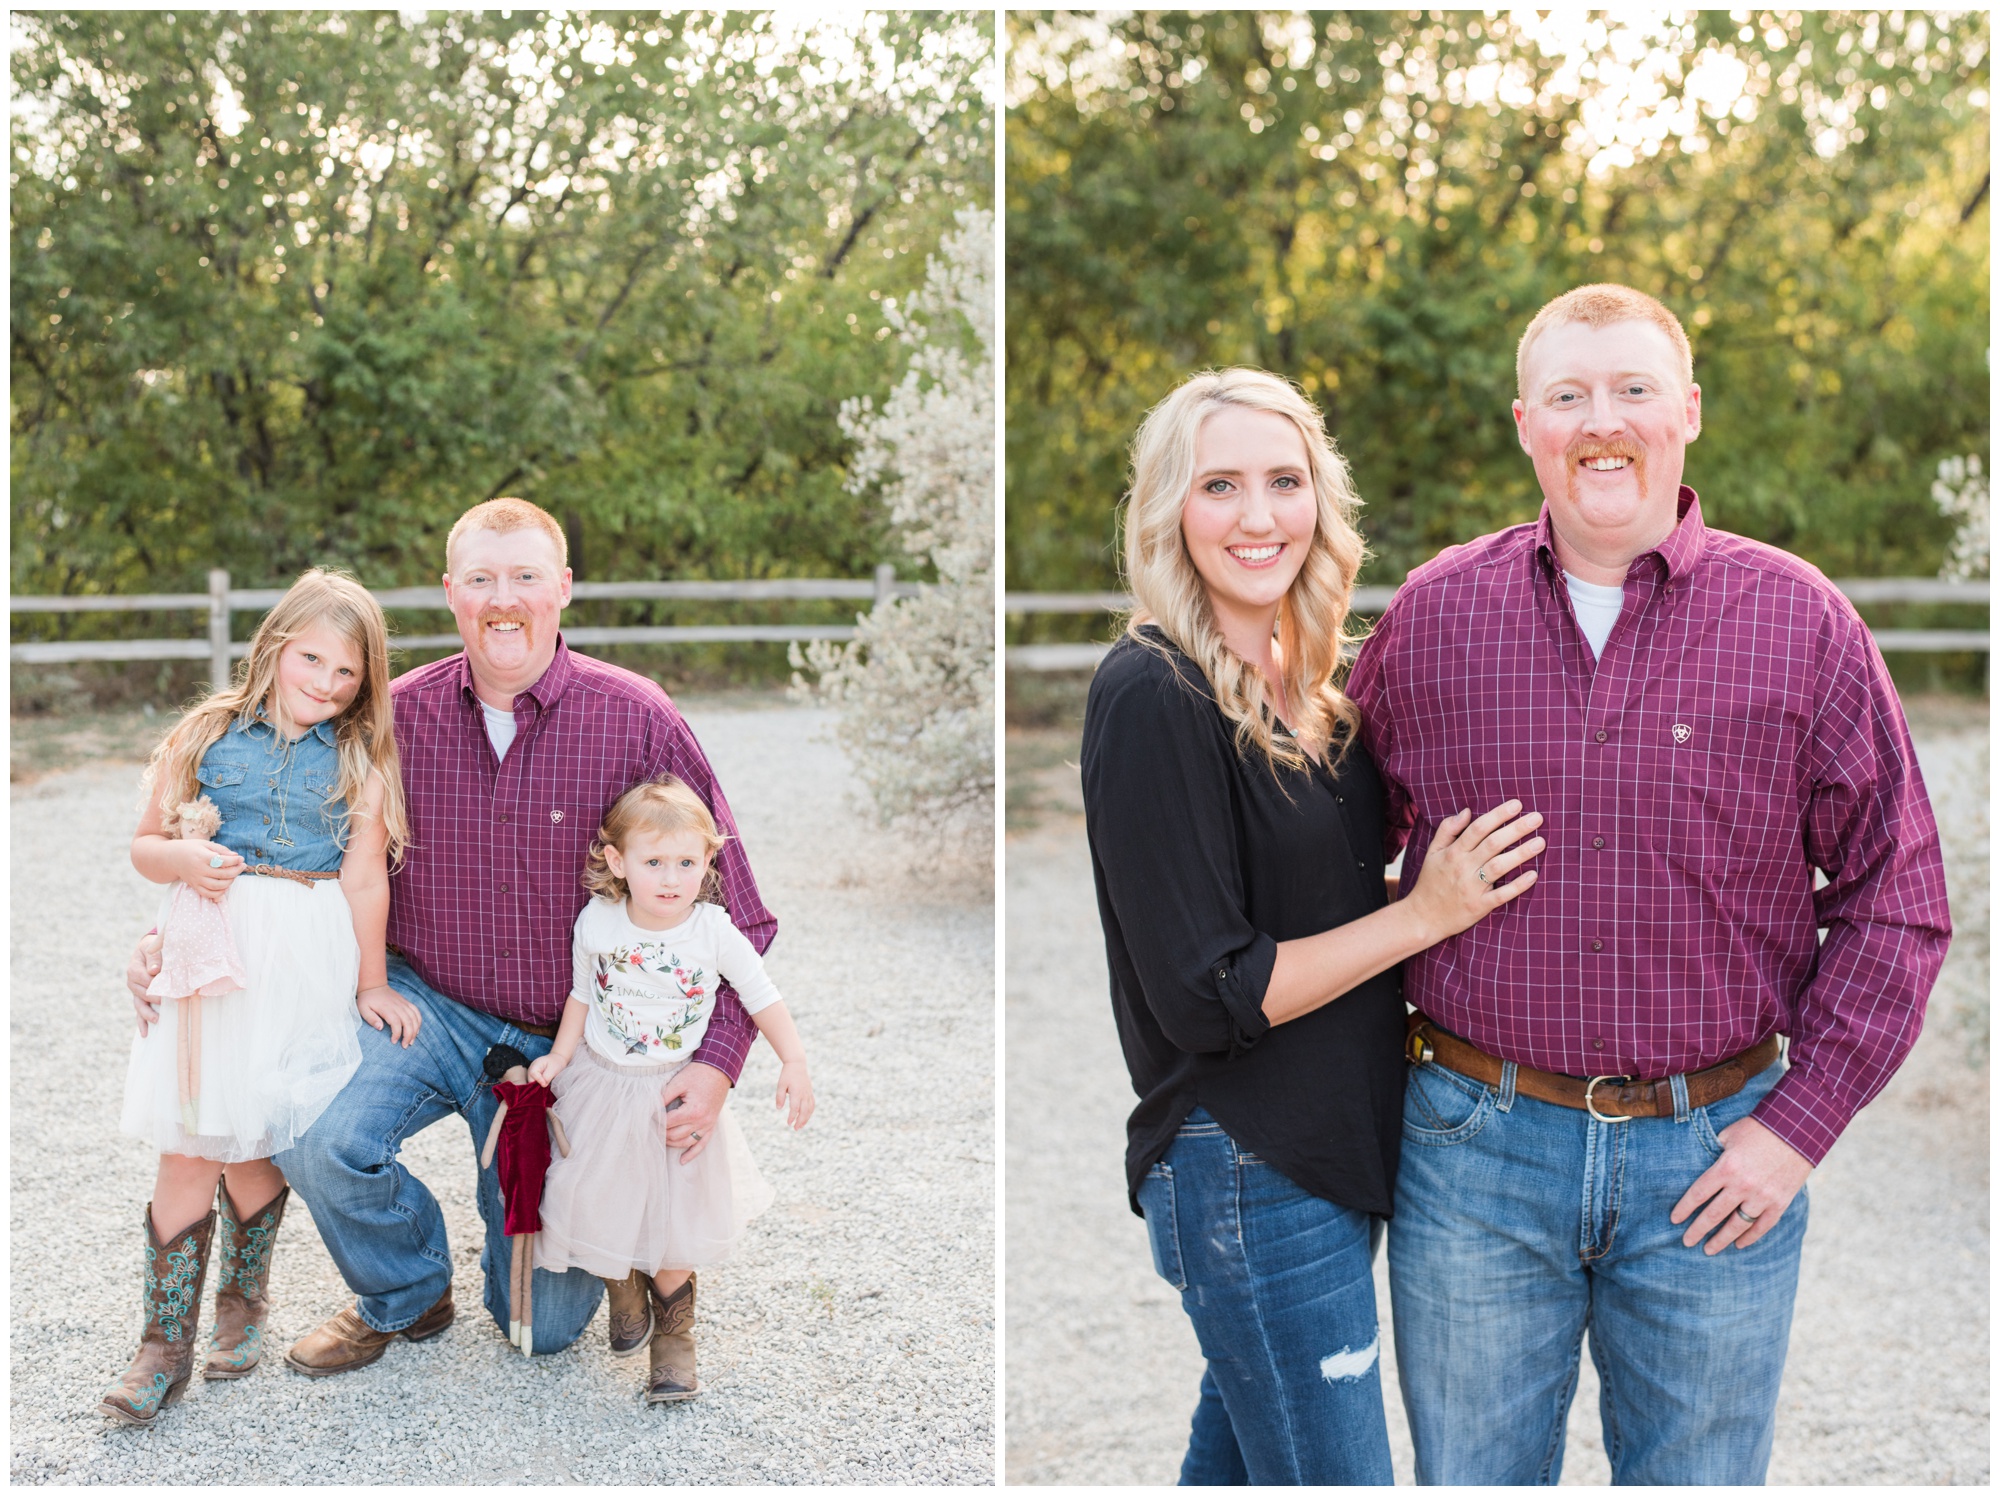 Fort Worth Stockyards | Fall Mini Sessions | Fort Worth Family Photographer | Fort Worth Photographer | Lauren Grimes Photography